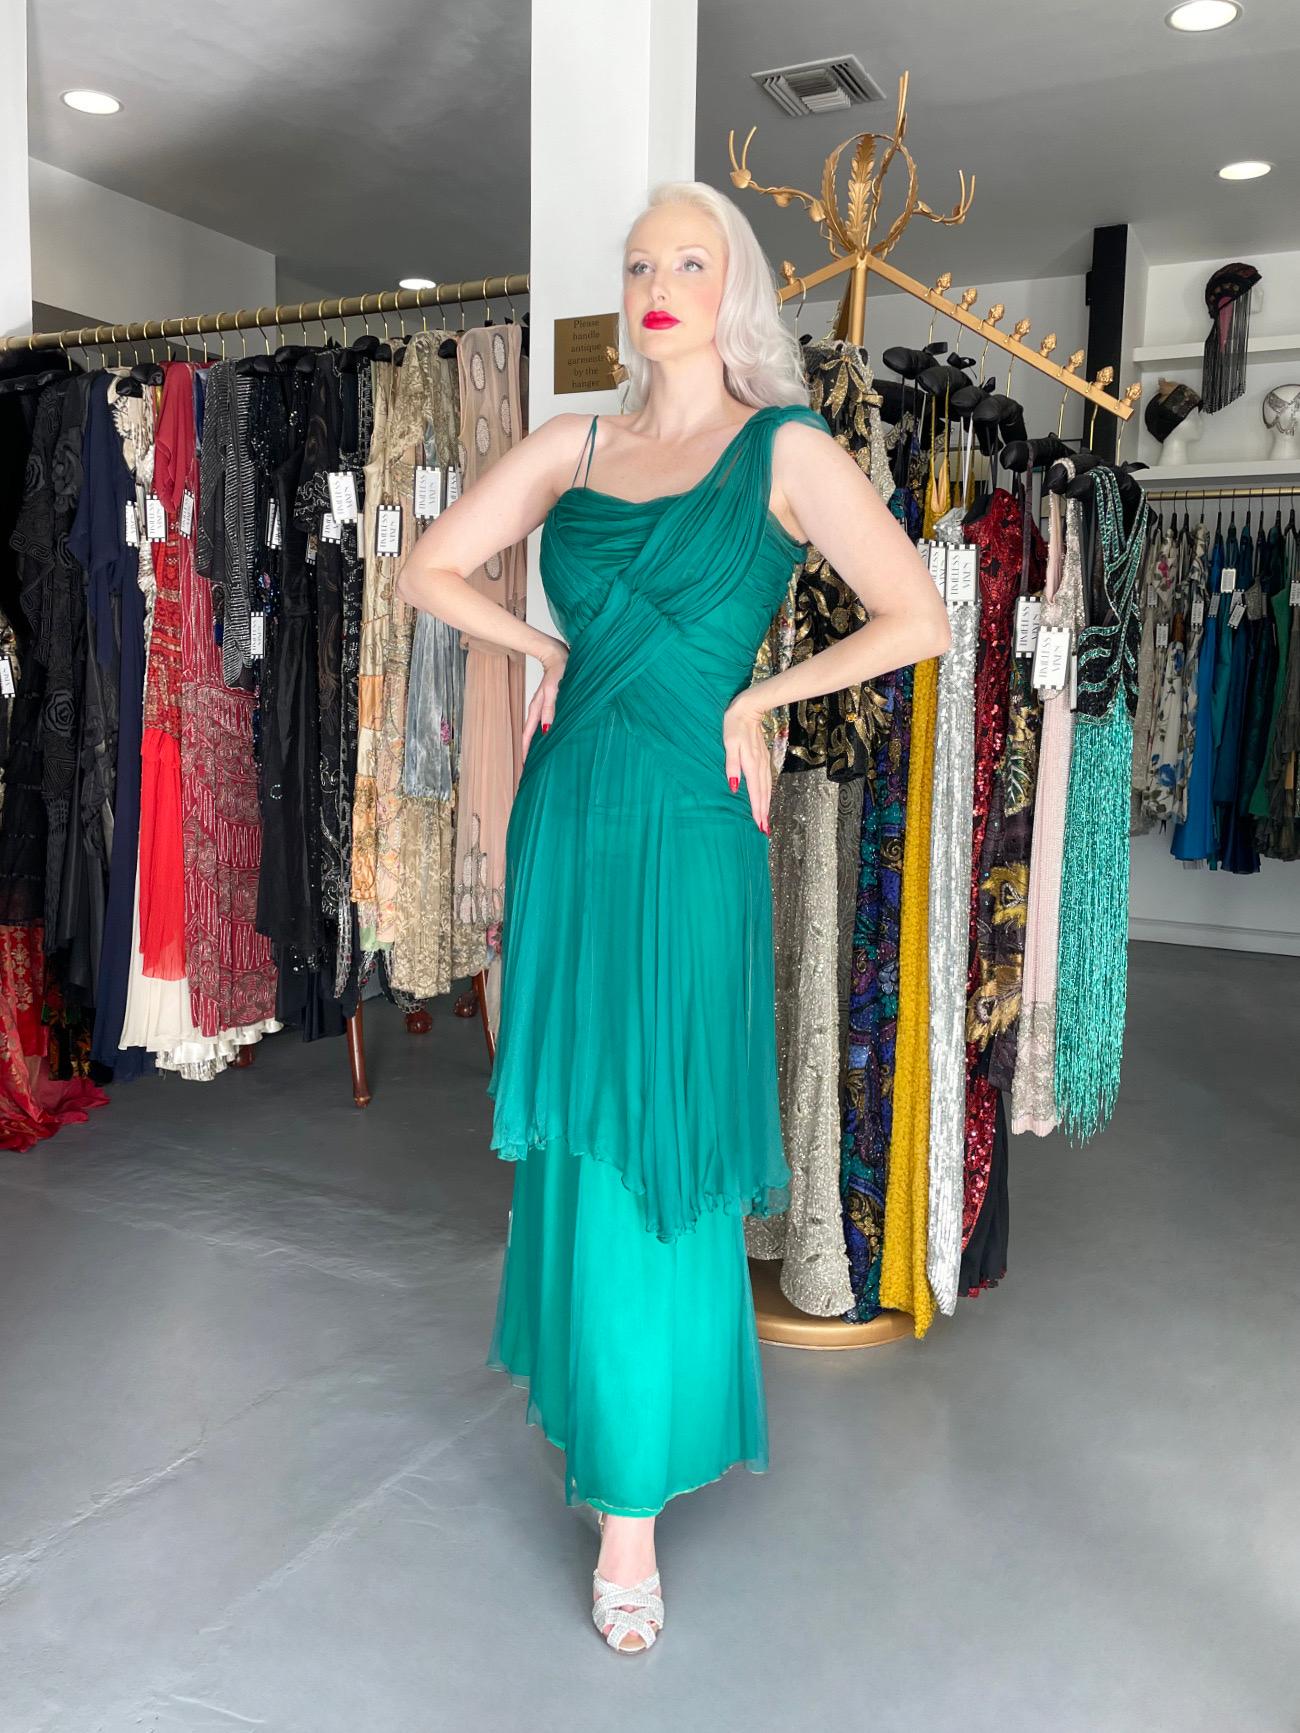 An incredibly ethereal and ultra rare Irene Lentz custom couture vibrant teal green  silk chiffon goddess gown dating back to her 1958 collection. Irene Lentz stunned the world in the 1930's, 40's and 50's with her ingeniously constructed,